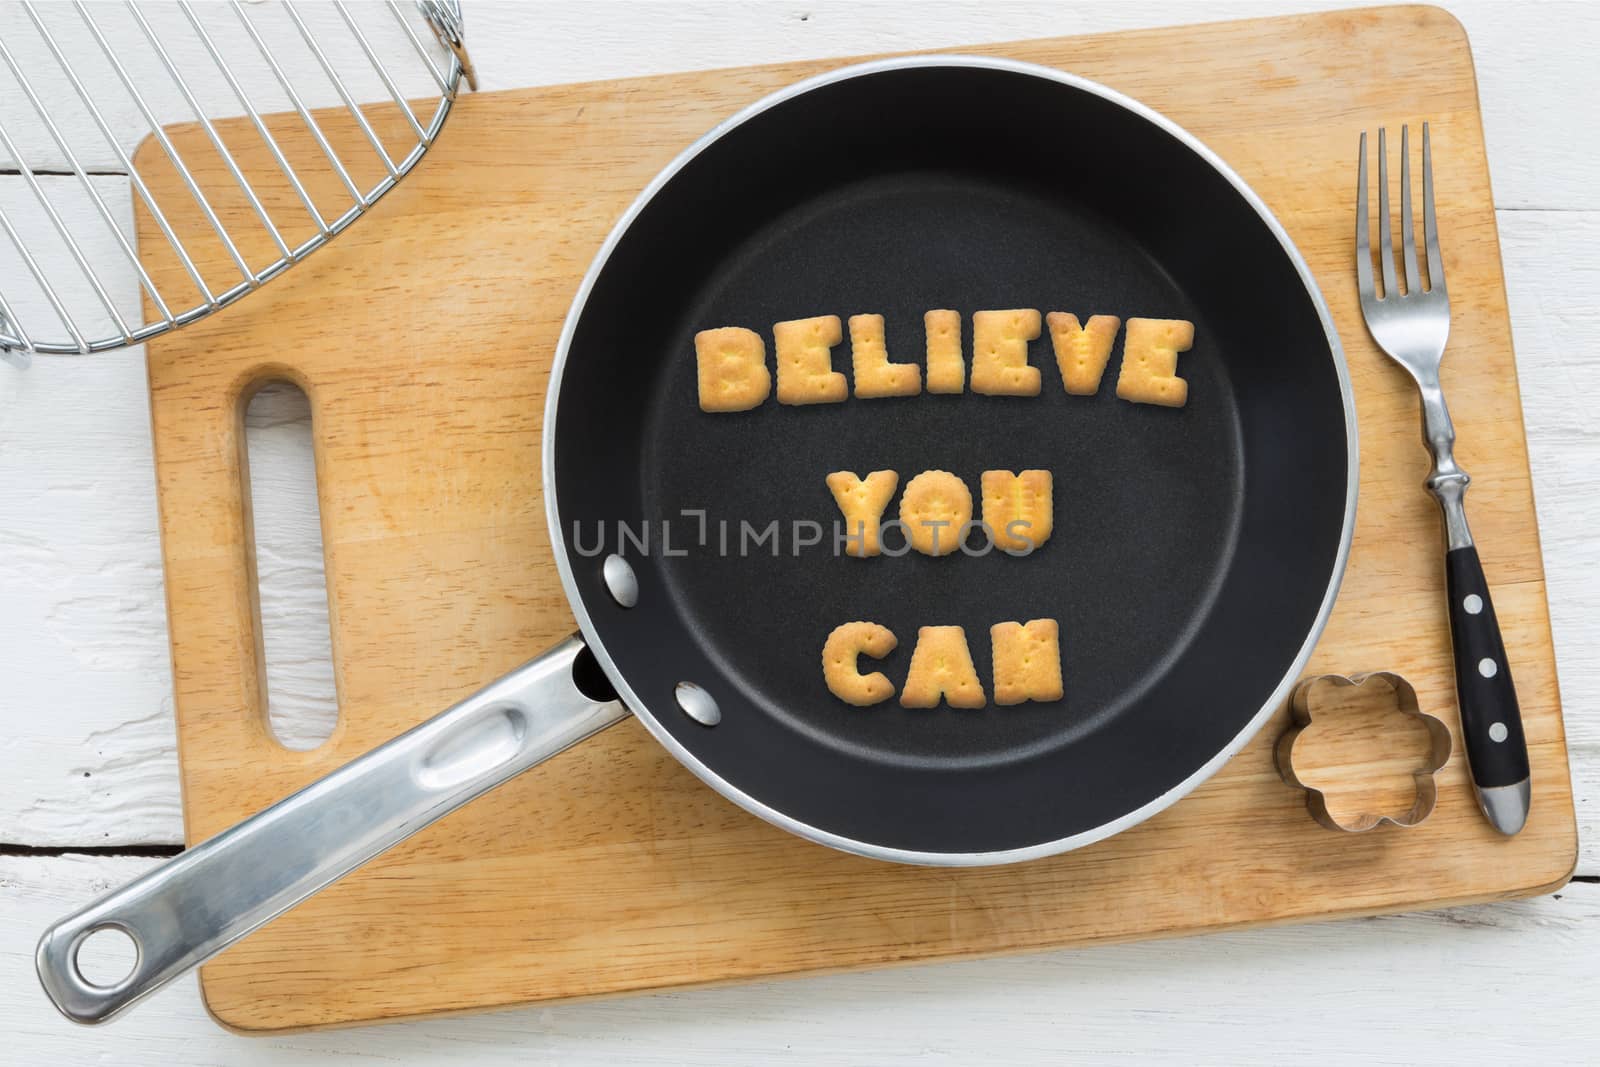 Alphabet biscuits quote BELIEVE YOU CAN and kitchenware by vinnstock